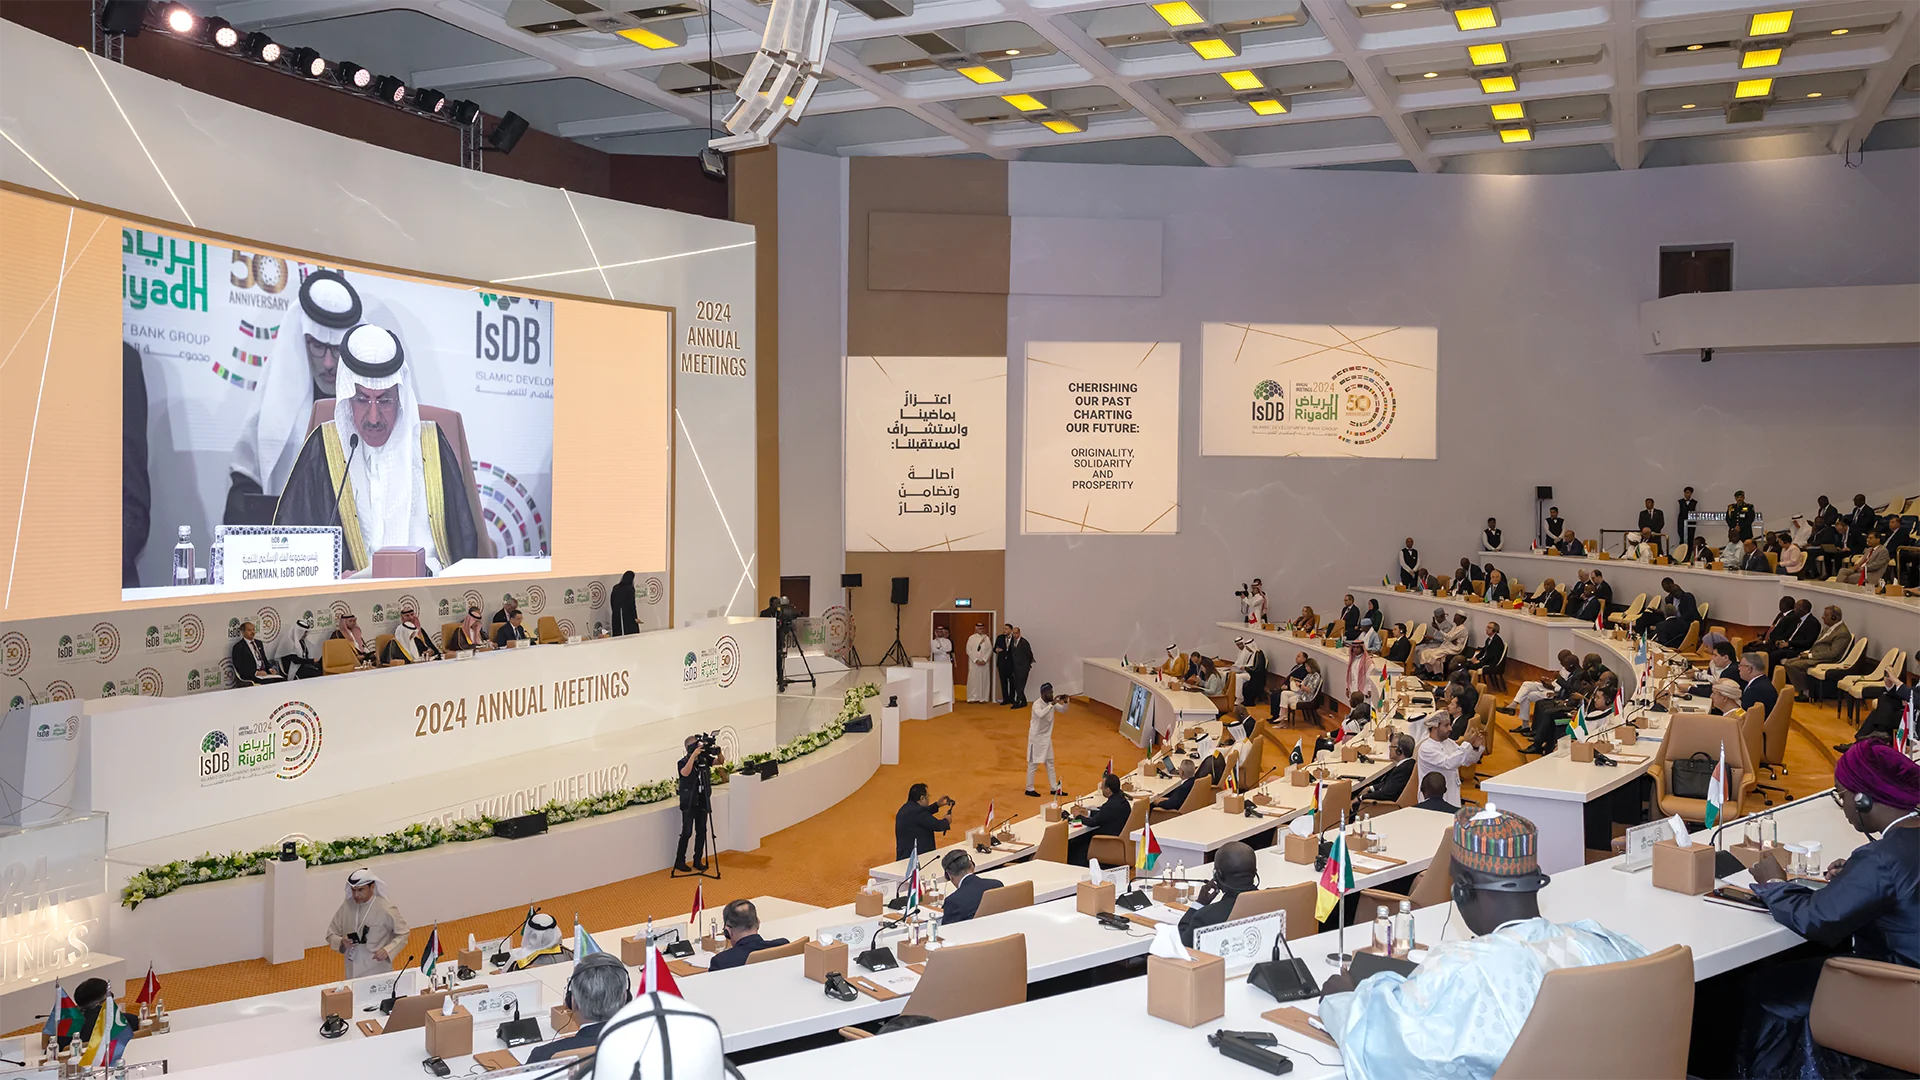 His Excellency the Minister of Finance, Mr. Mohammed Al-Jadaan speaking at the Islamic Bank annual meeting organized and coordinated by enso Arabia